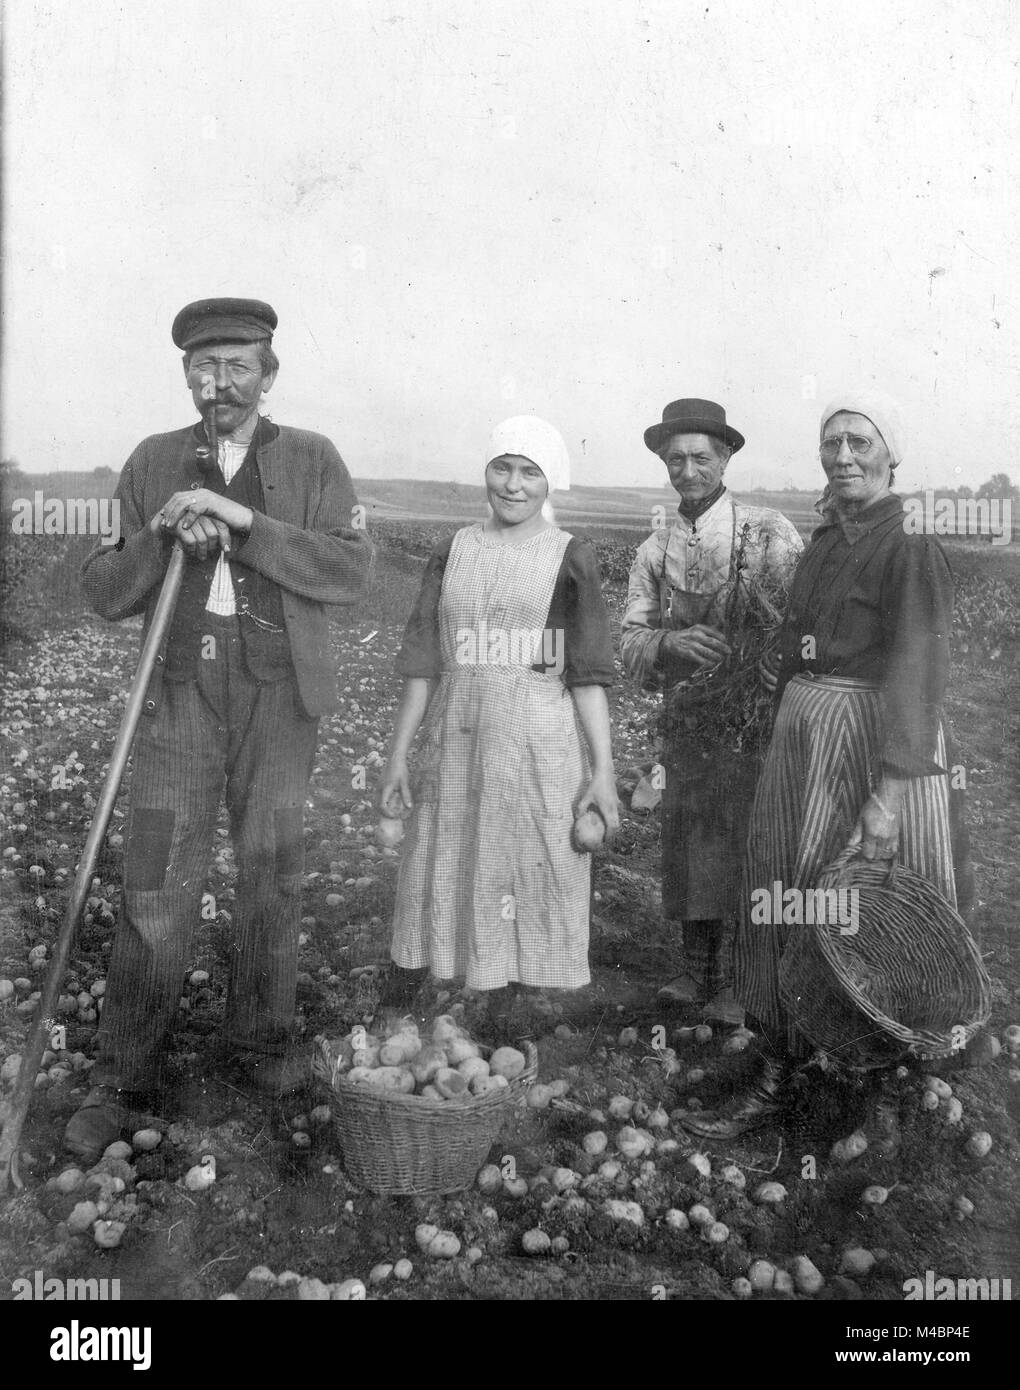 Harvesting potatoes Black and White Stock Photos and Images pic